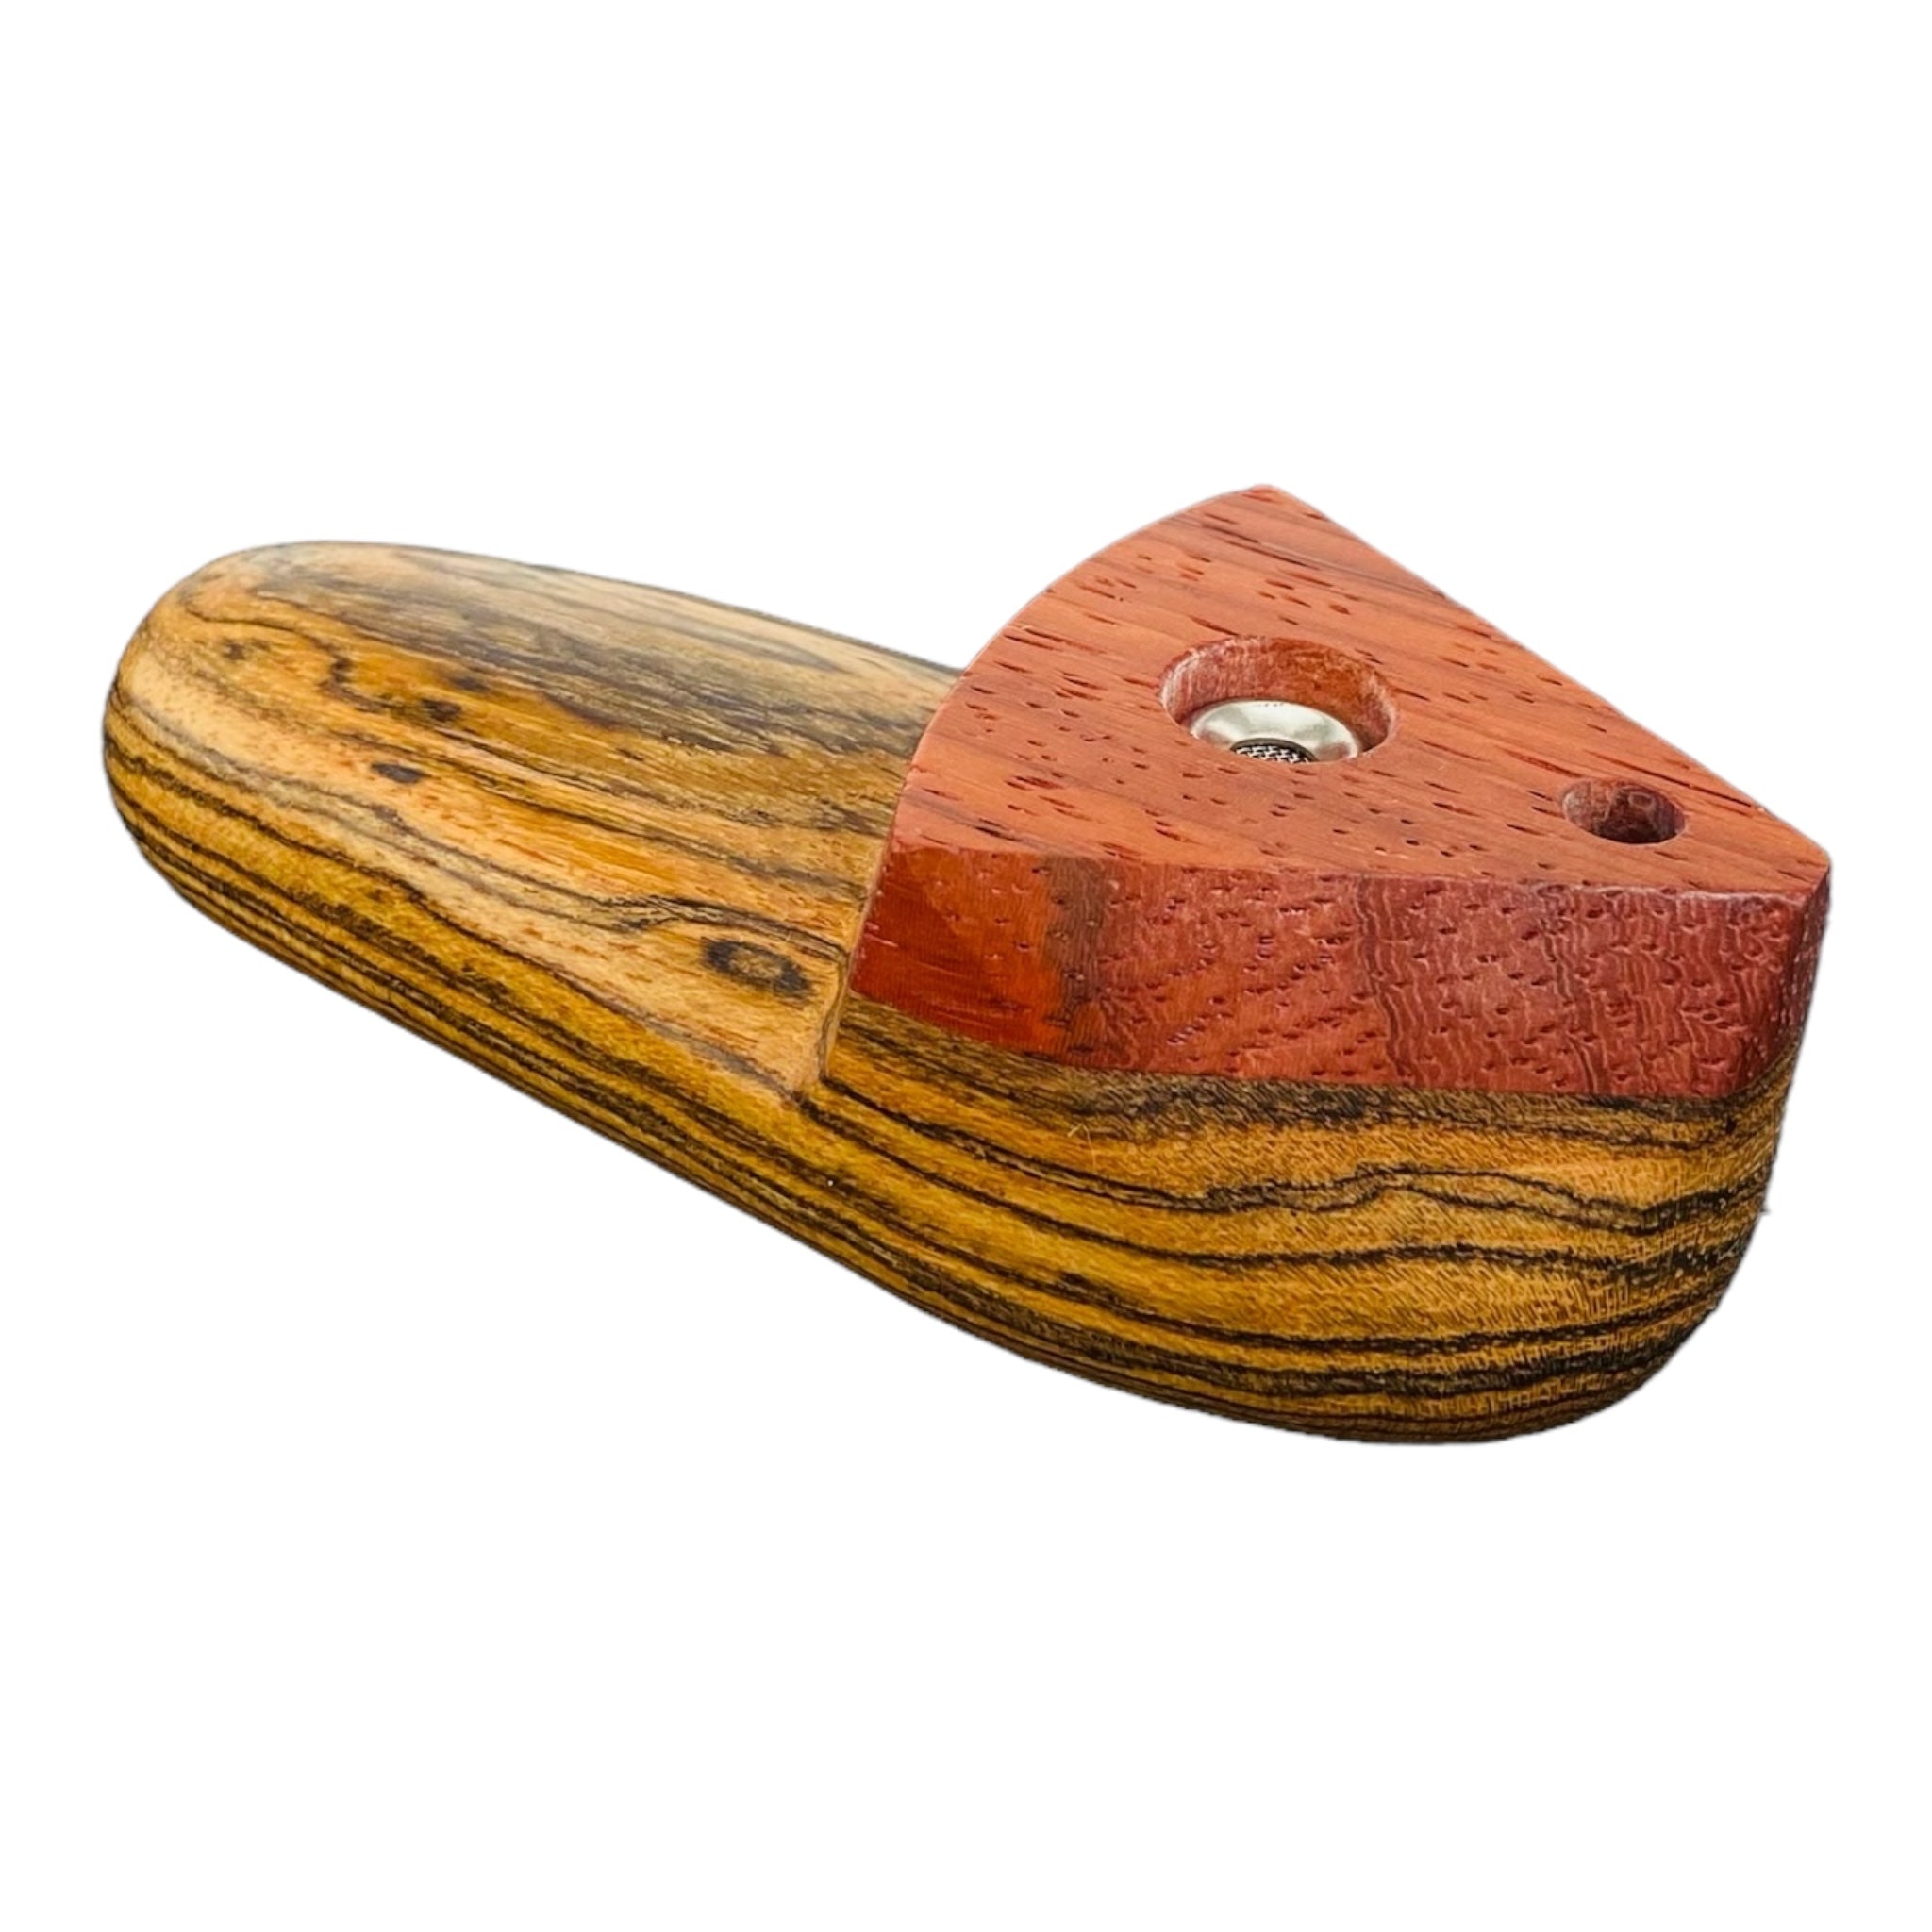 Wood Hand Pipe - Large Oval Hand Pipe With Triangle Lid With Vent